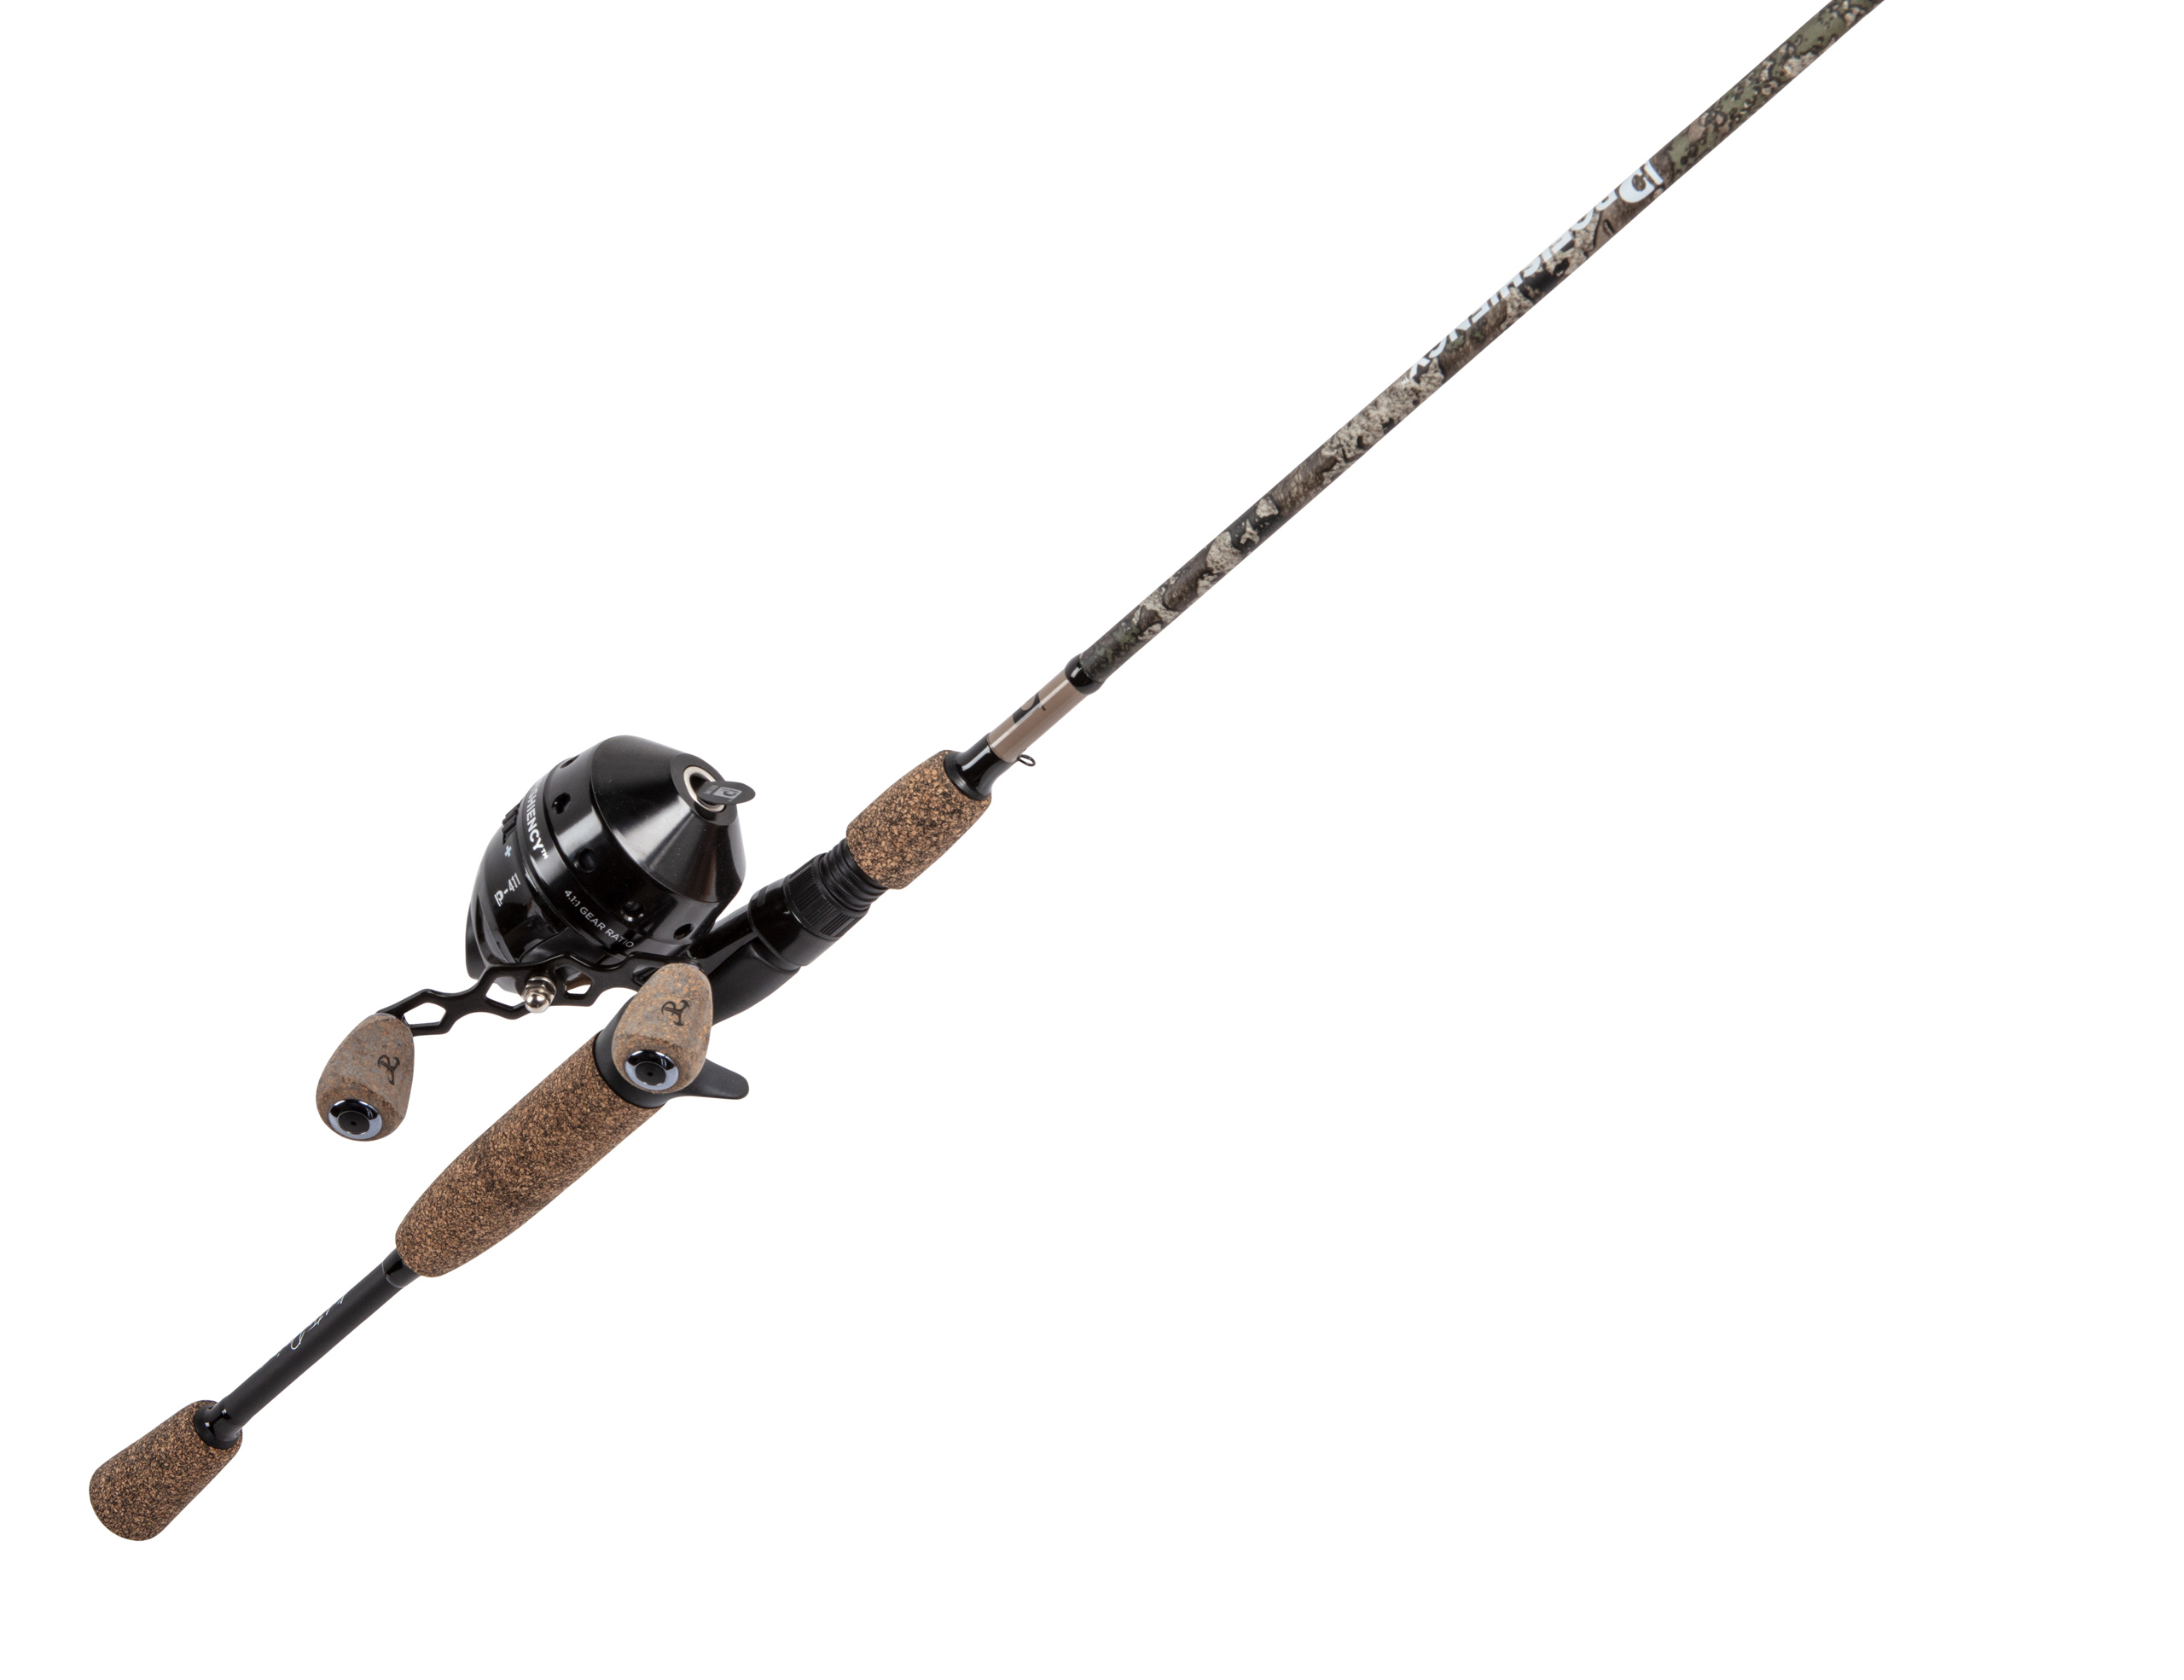 ProFISHiency 6ft True Timber Micro Spincast Combo PRO6MSCTTC , $4.50 Off  with Free S&H — CampSaver